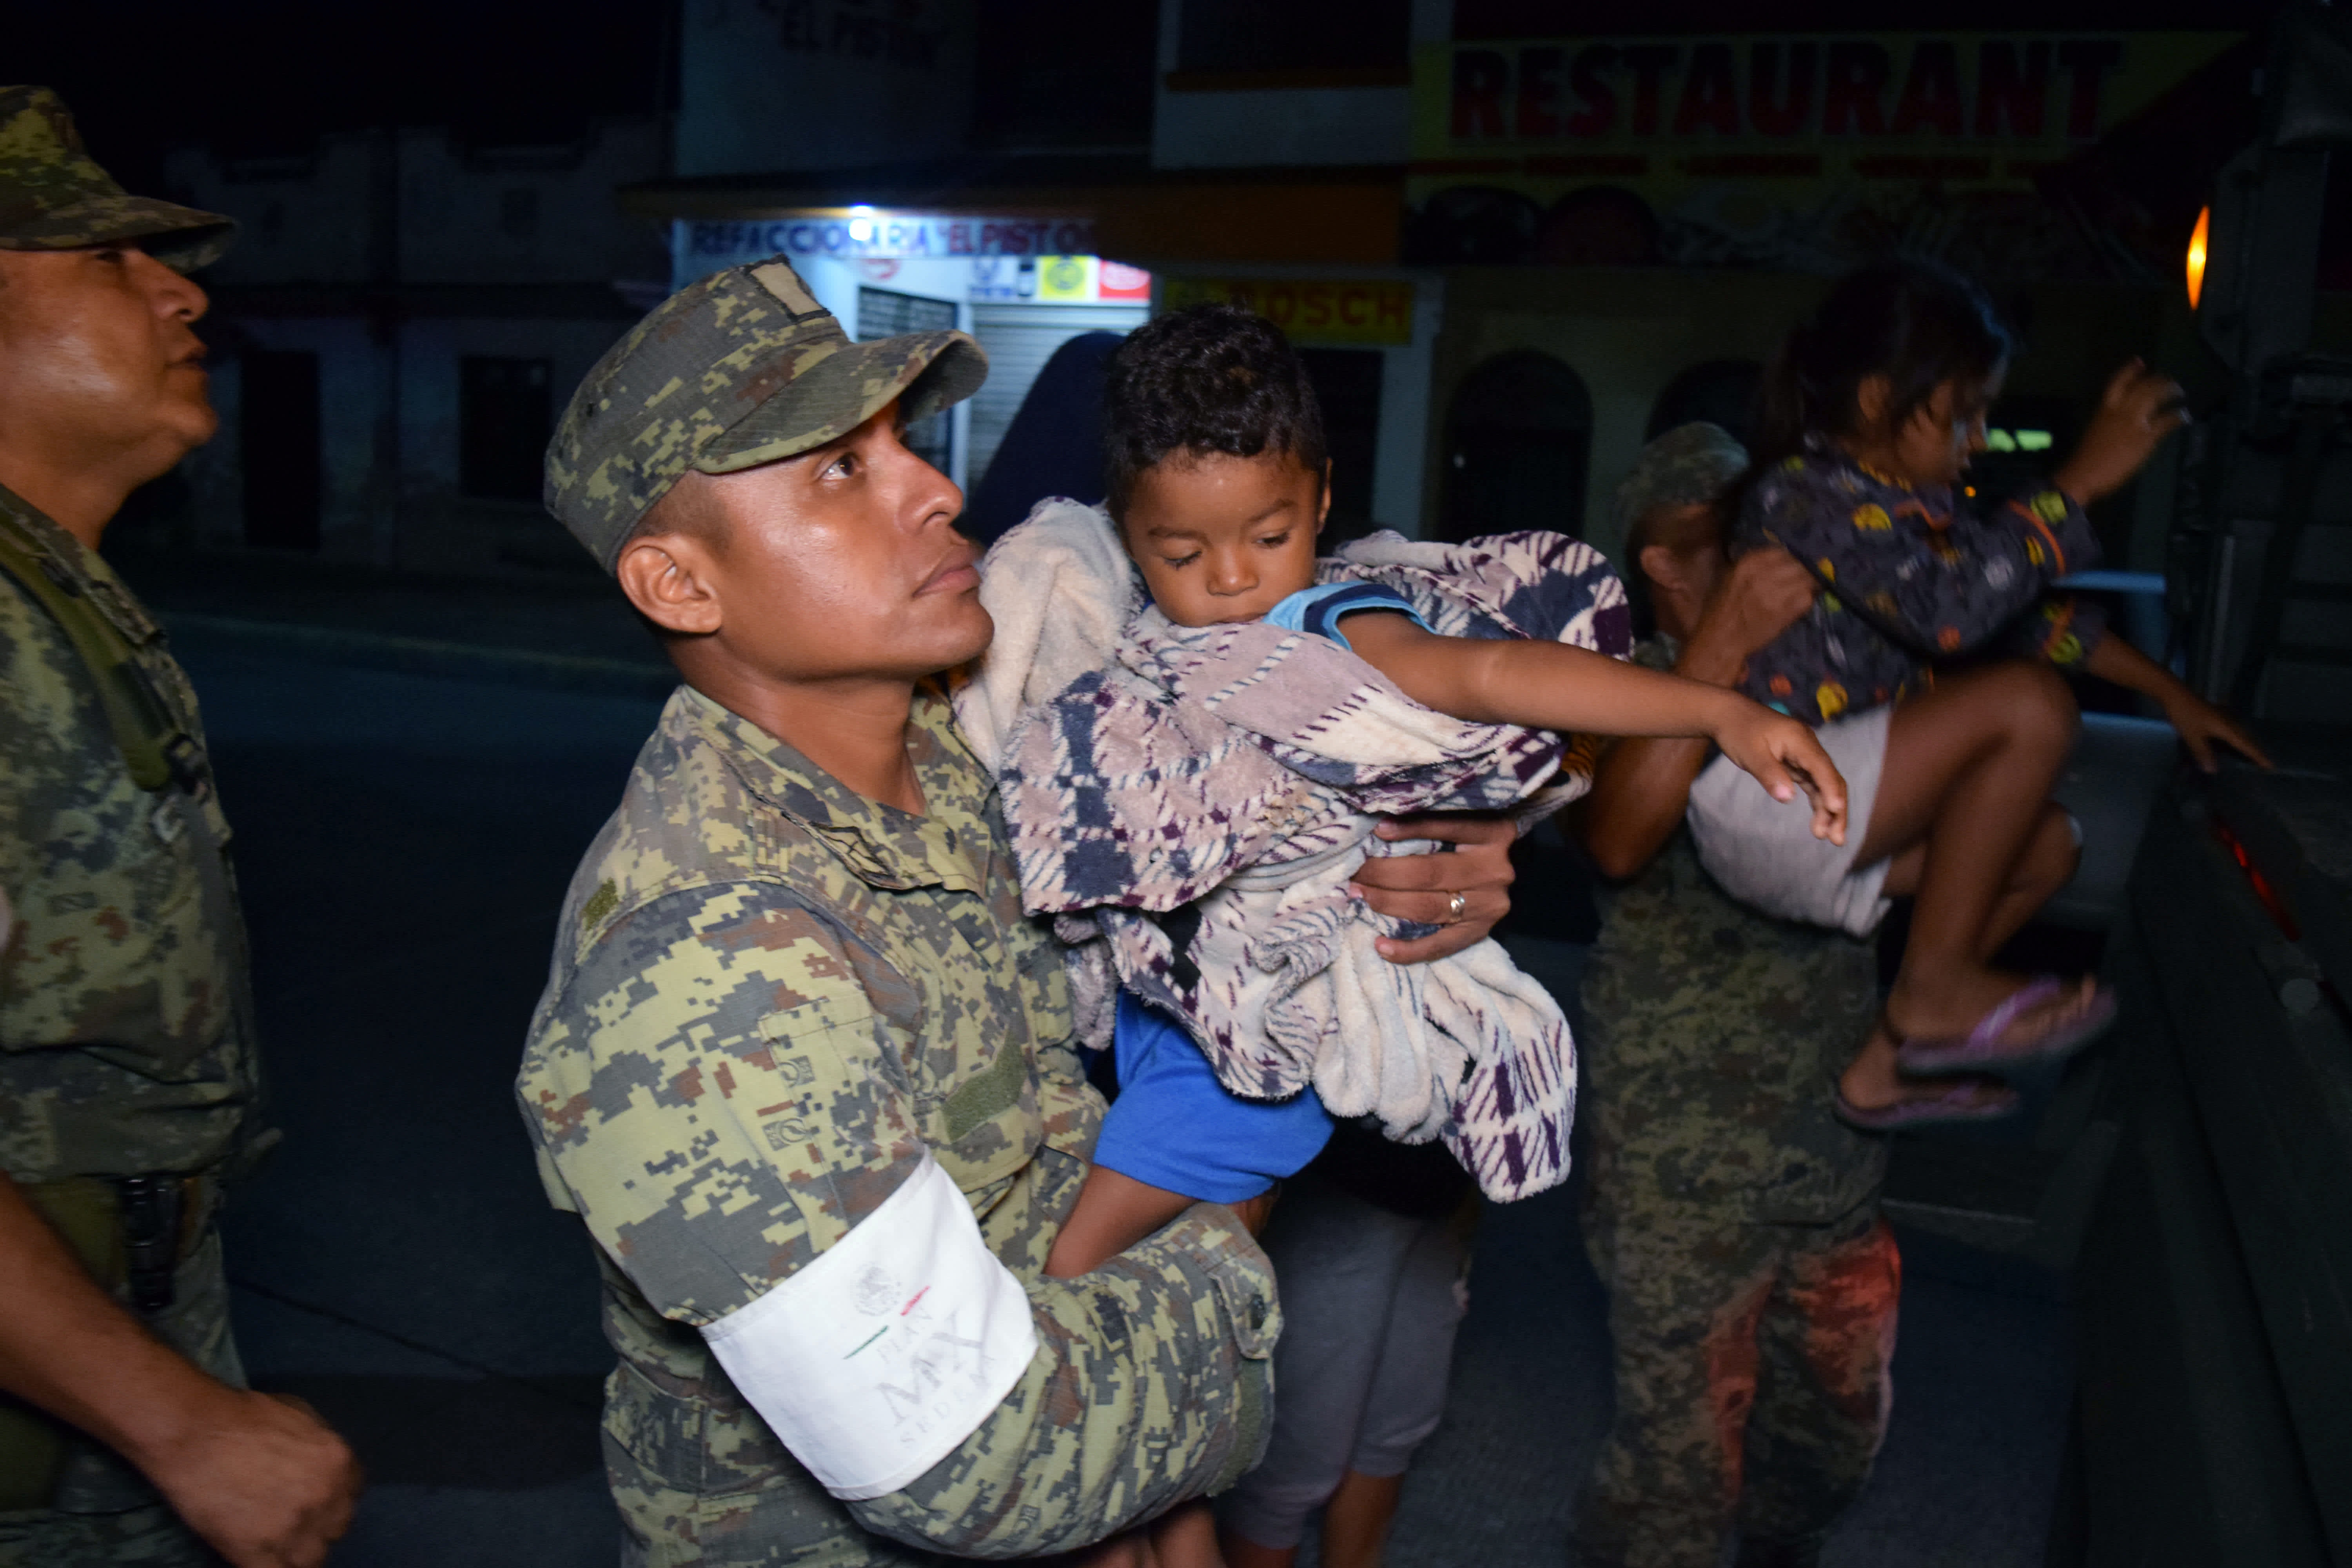 Soldiers help children to get on a truck as residents are being evacuated from their coastal town after an earthquake struck off the southern coast, in Puerto Madero, Mexico. Jose Torres / Reuters